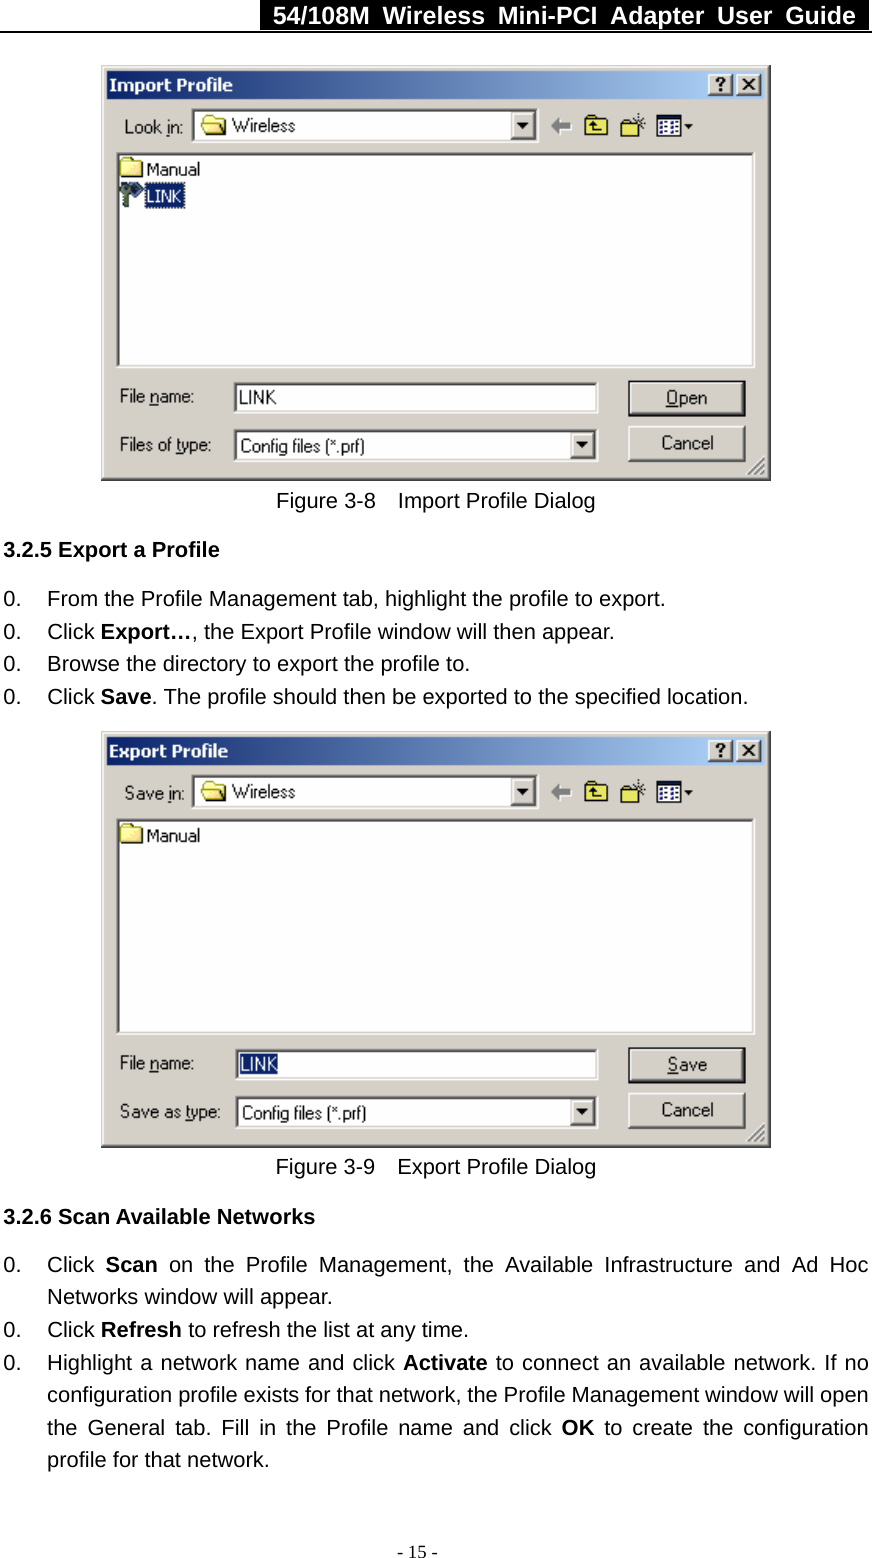   54/108M Wireless Mini-PCI Adapter User Guide  - 15 -  Figure 3-8    Import Profile Dialog 3.2.5 Export a Profile 0.  From the Profile Management tab, highlight the profile to export. 0. Click Export…, the Export Profile window will then appear. 0.  Browse the directory to export the profile to. 0. Click Save. The profile should then be exported to the specified location.  Figure 3-9    Export Profile Dialog 3.2.6 Scan Available Networks 0. Click Scan on the Profile Management, the Available Infrastructure and Ad Hoc Networks window will appear. 0. Click Refresh to refresh the list at any time. 0.  Highlight a network name and click Activate to connect an available network. If no configuration profile exists for that network, the Profile Management window will open the General tab. Fill in the Profile name and click OK to create the configuration profile for that network. 